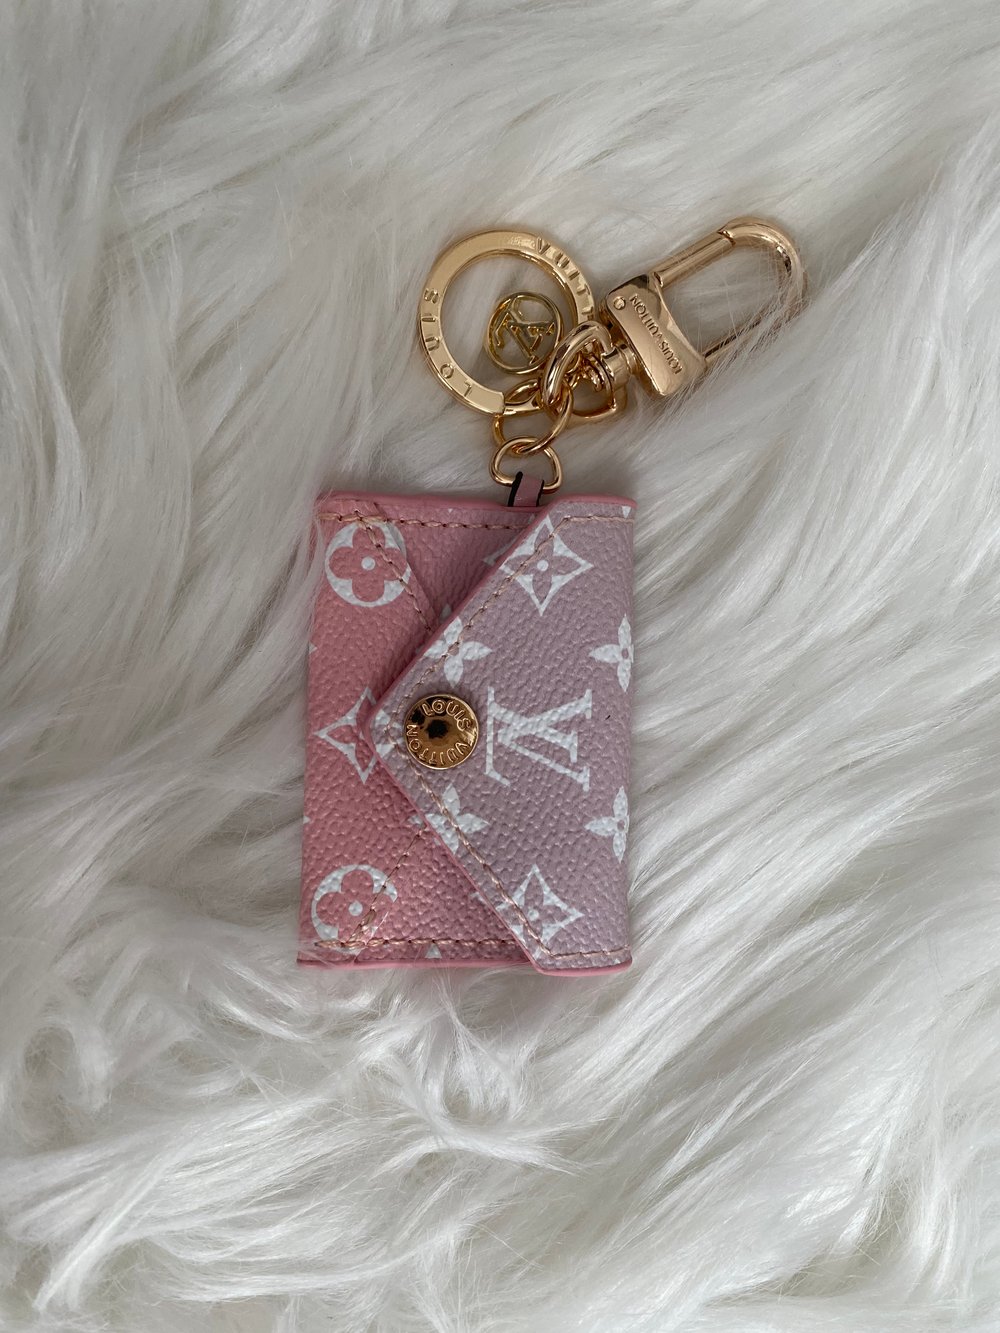 Image of LV purse KeyChain